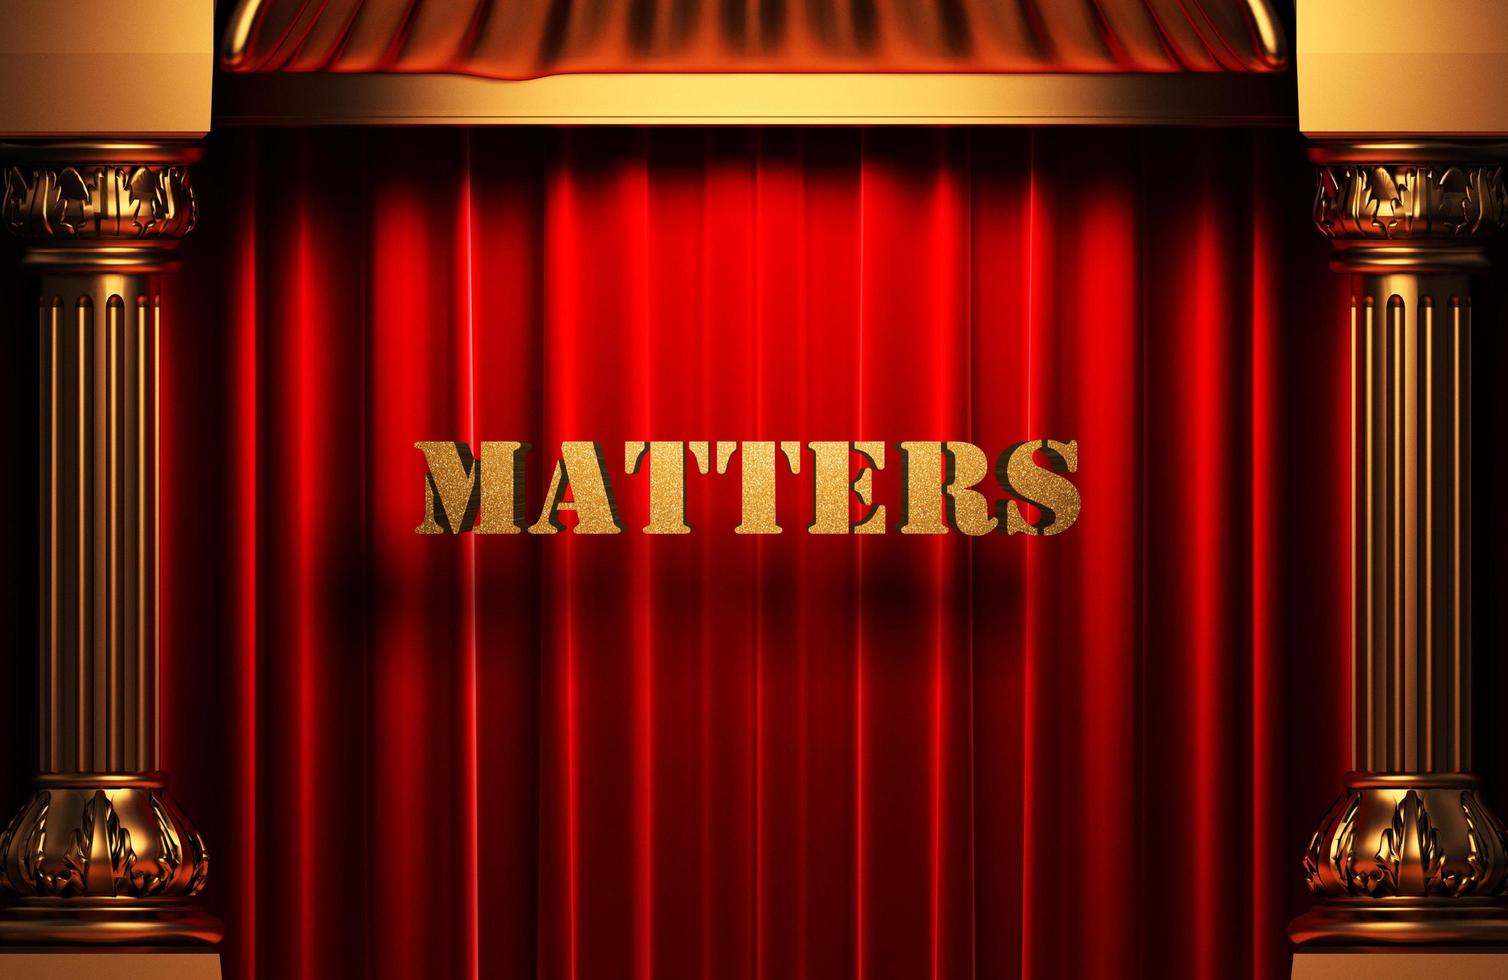 matters golden word on red curtain photo